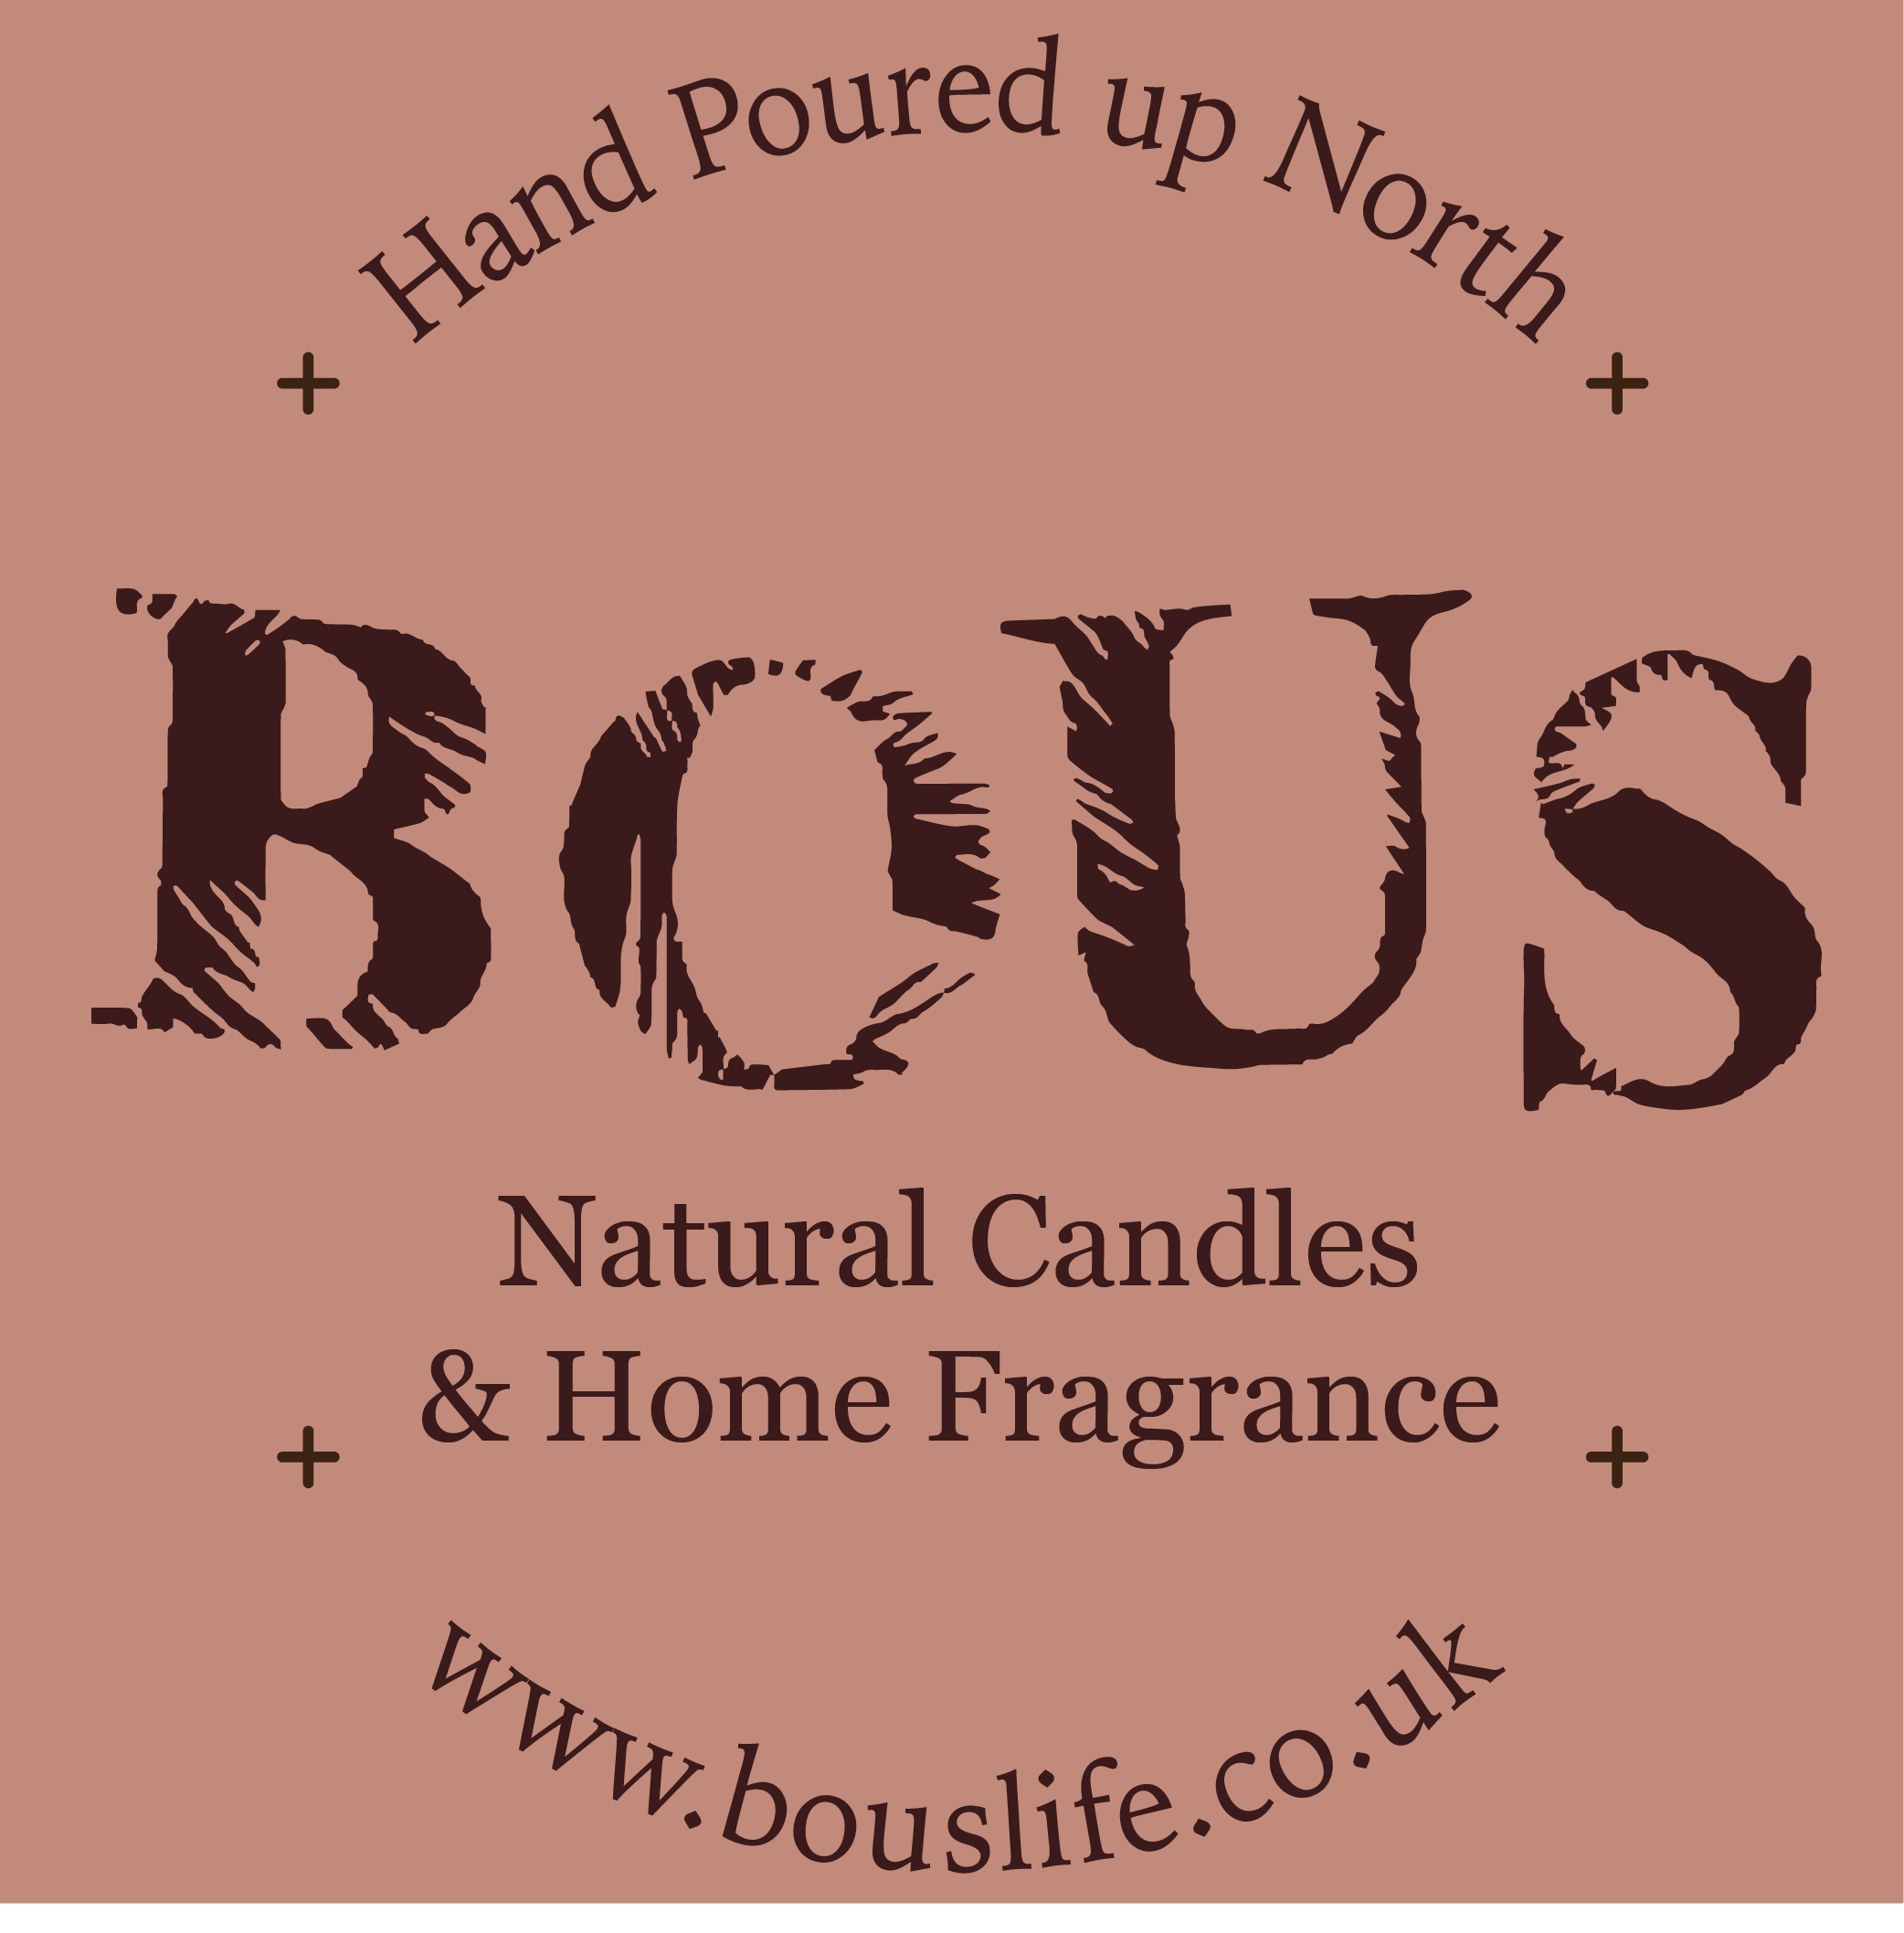 Bous Candles & Home Fragrance